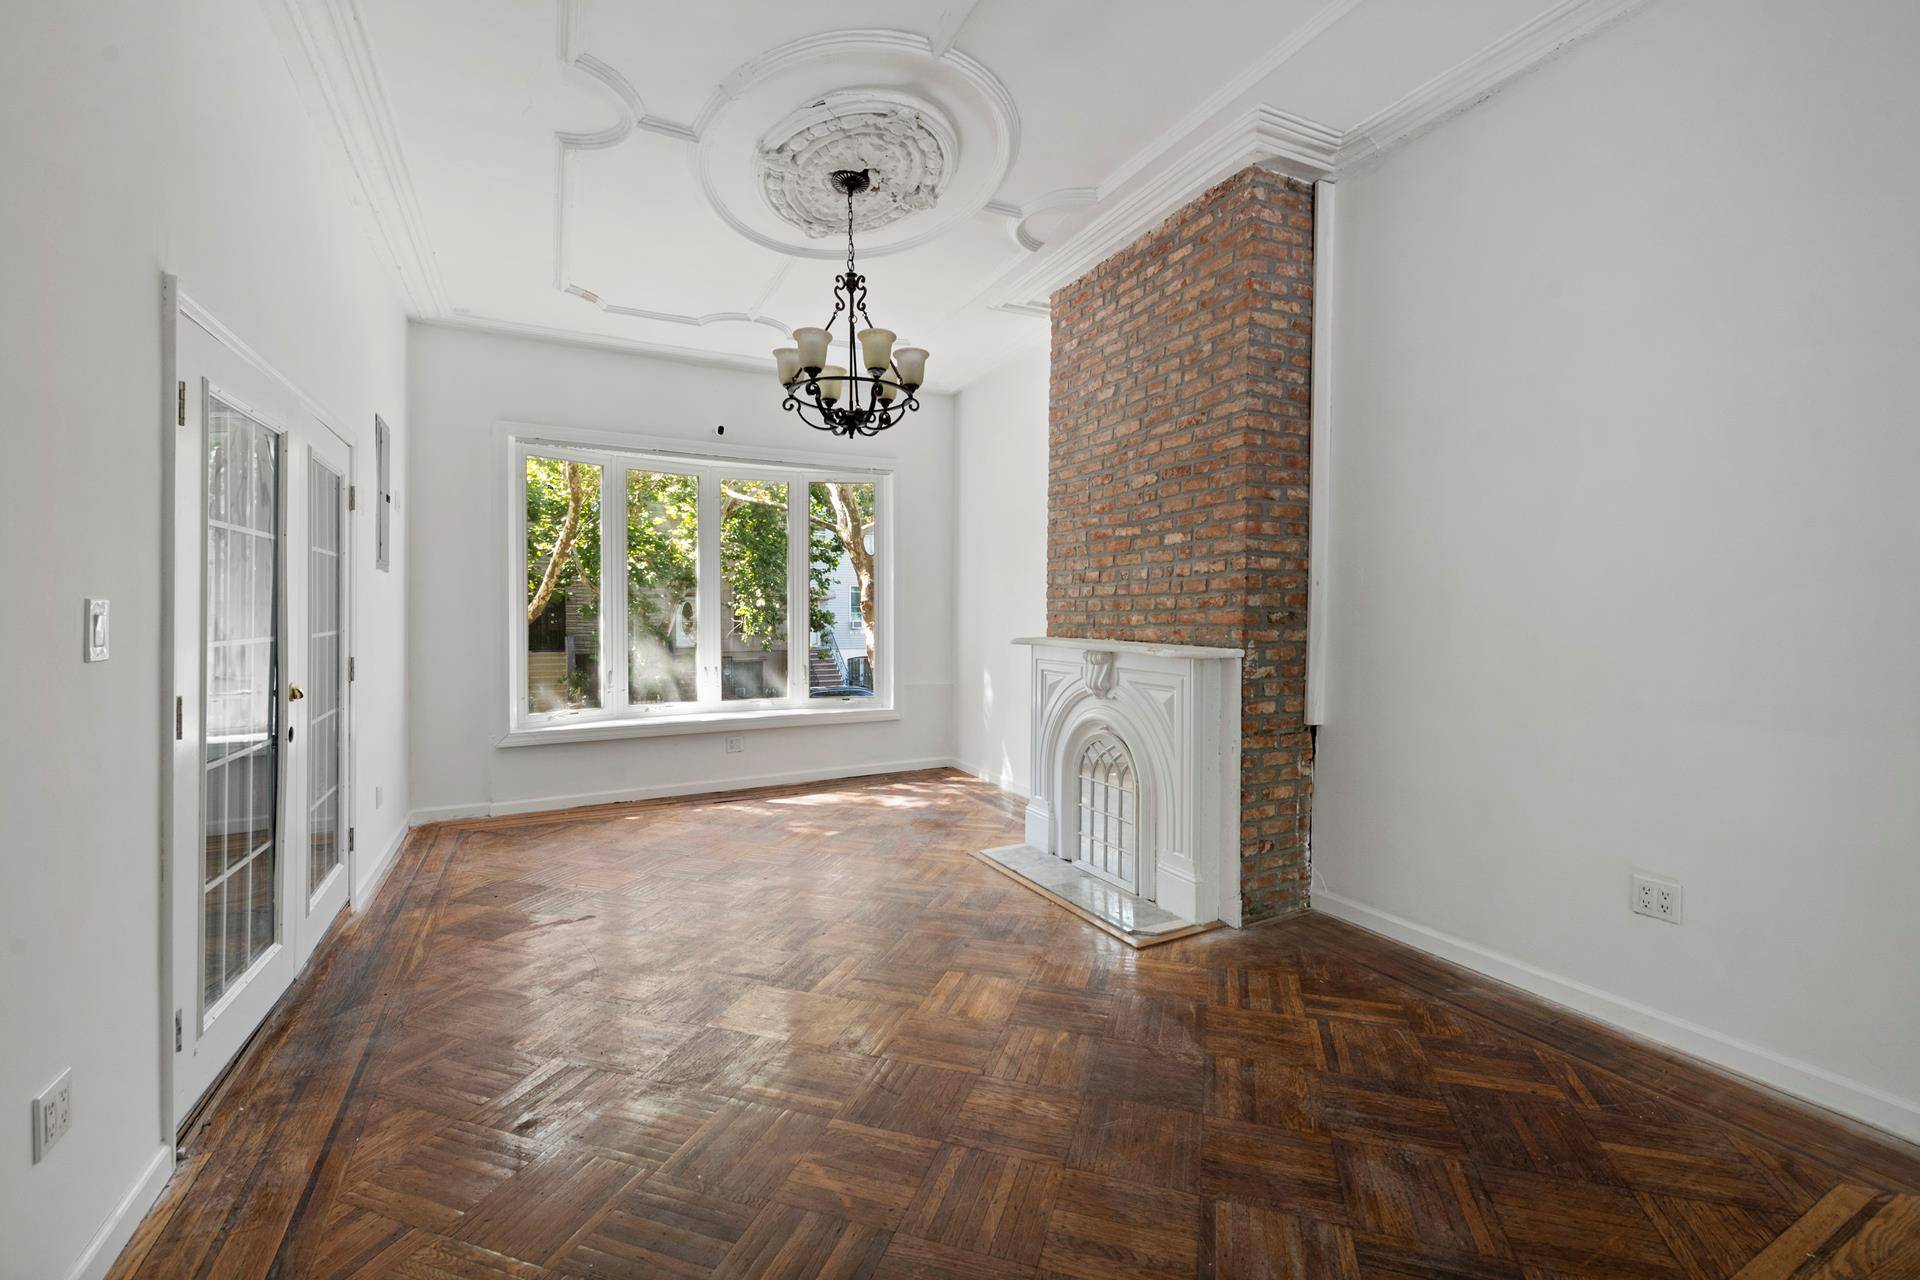 349 Monroe Street sits in the heart of a cheerful tree lined Bed Stuy block.